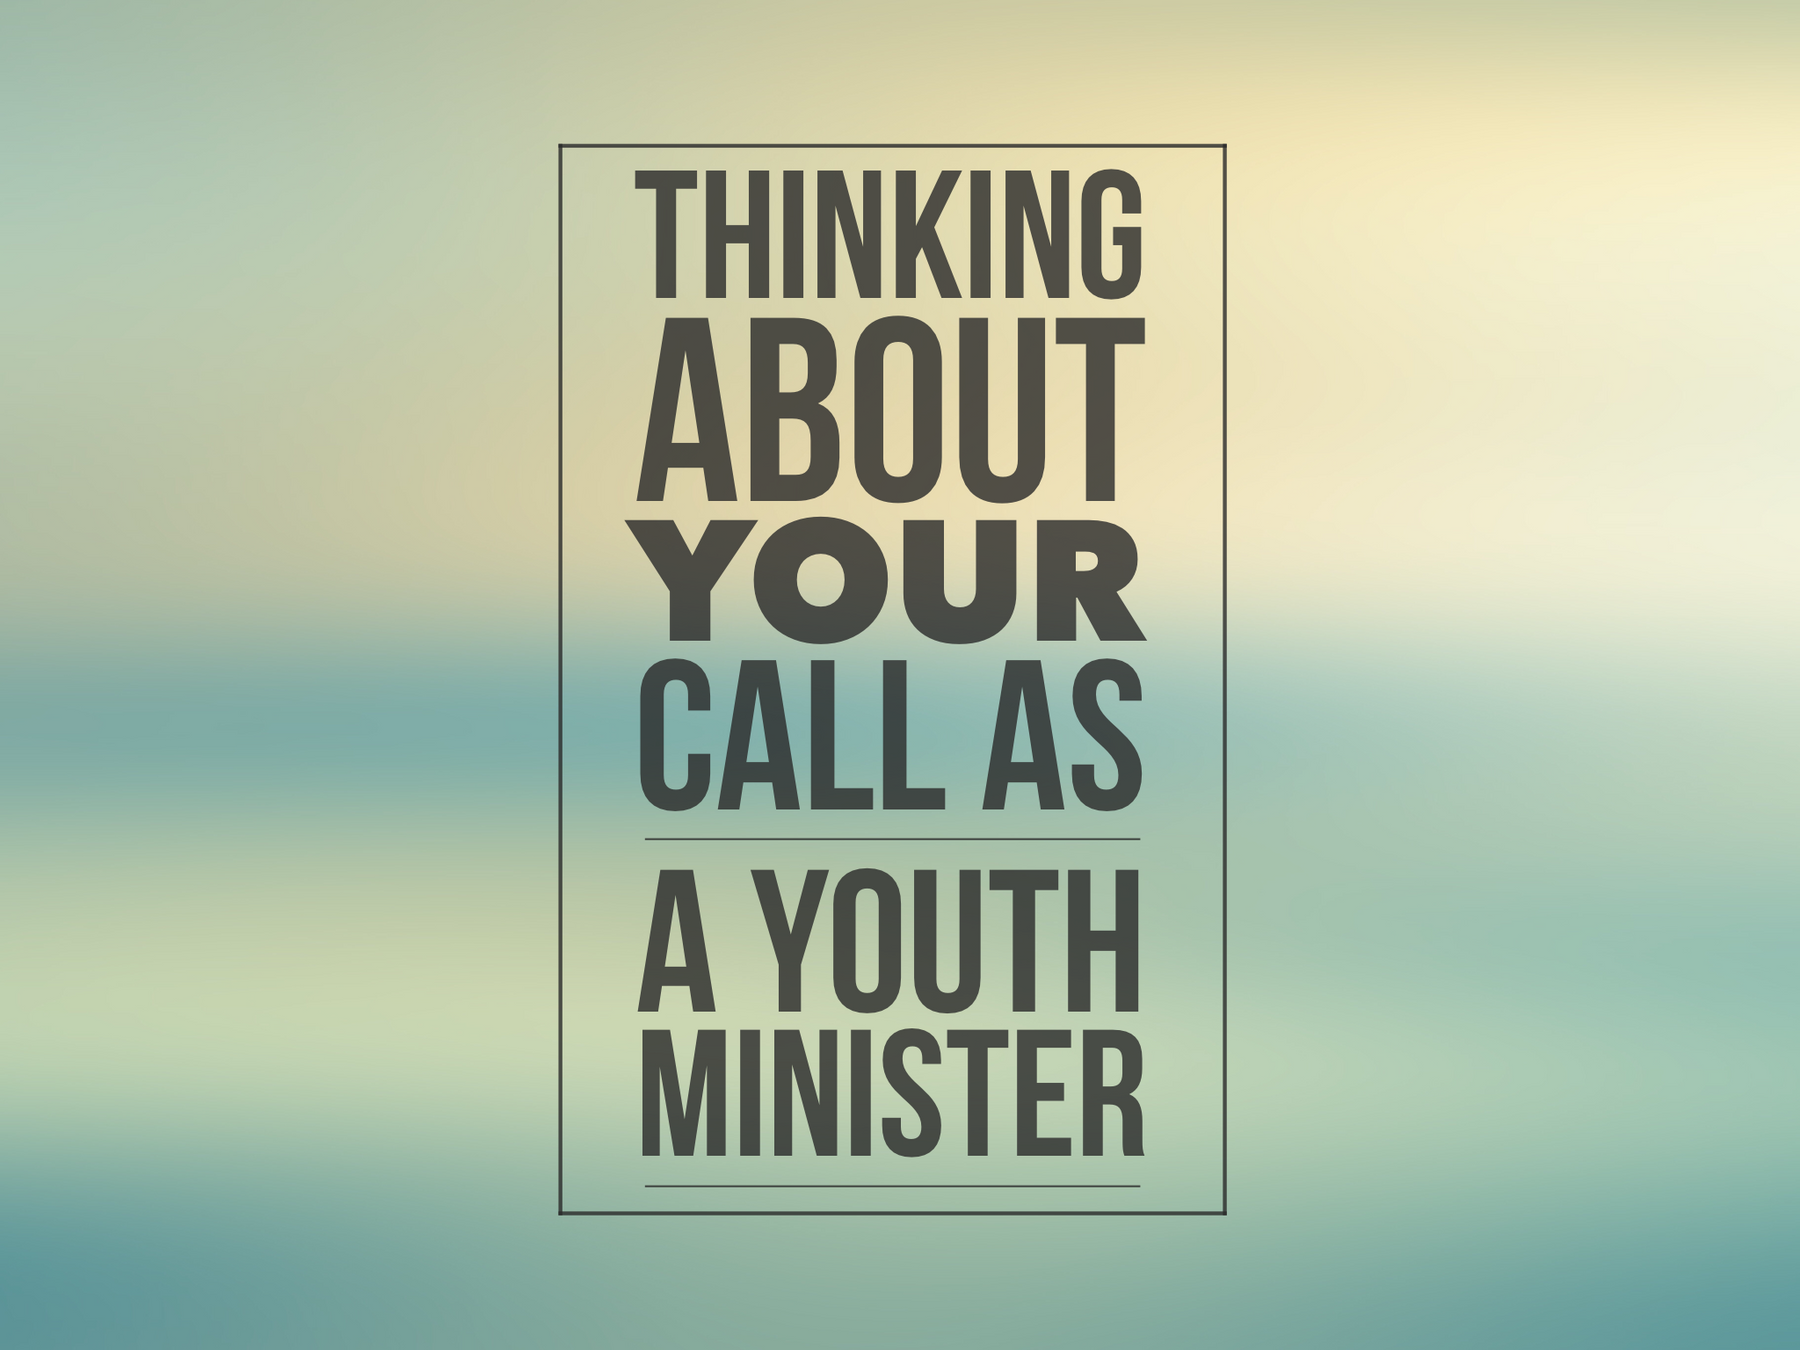 A Helpful Way To Think About Your Call As A Youth Minister